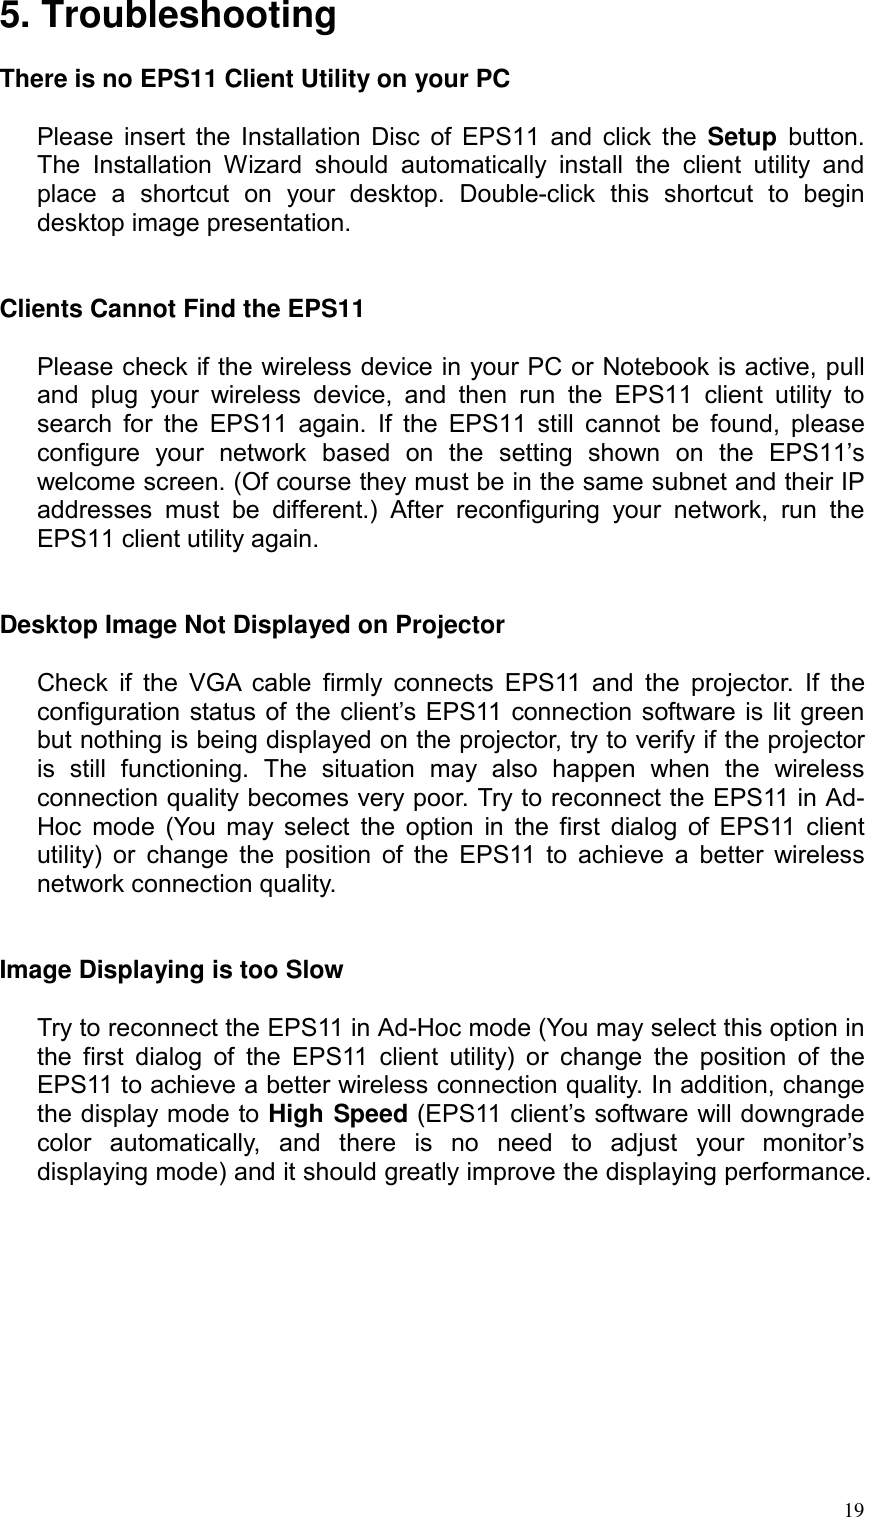 5. Troubleshooting  There is no EPS11 Client Utility on your PC  Please insert the Installation Disc of EPS11 and click the Setup  button. The Installation Wizard should automatically install the client utility and place a shortcut on your desktop. Double-click this shortcut to begin desktop image presentation.   Clients Cannot Find the EPS11  Please check if the wireless device in your PC or Notebook is active, pull and plug your wireless device, and then run the EPS11 client utility to search for the EPS11 again. If the EPS11 still cannot be found, please configure your network based on the setting shown on the EPS11’s welcome screen. (Of course they must be in the same subnet and their IP addresses must be different.) After reconfiguring your network, run the EPS11 client utility again.   Desktop Image Not Displayed on Projector  Check if the VGA cable firmly connects EPS11 and the projector. If the configuration status of the client’s EPS11 connection software is lit green but nothing is being displayed on the projector, try to verify if the projector is still functioning. The situation may also happen when the wireless connection quality becomes very poor. Try to reconnect the EPS11 in Ad-Hoc mode (You may select the option in the first dialog of EPS11 client utility) or change the position of the EPS11 to achieve a better wireless network connection quality.   Image Displaying is too Slow  Try to reconnect the EPS11 in Ad-Hoc mode (You may select this option in the first dialog of the EPS11 client utility) or change the position of the EPS11 to achieve a better wireless connection quality. In addition, change the display mode to High Speed (EPS11 client’s software will downgrade color automatically, and there is no need to adjust your monitor’s displaying mode) and it should greatly improve the displaying performance.   19